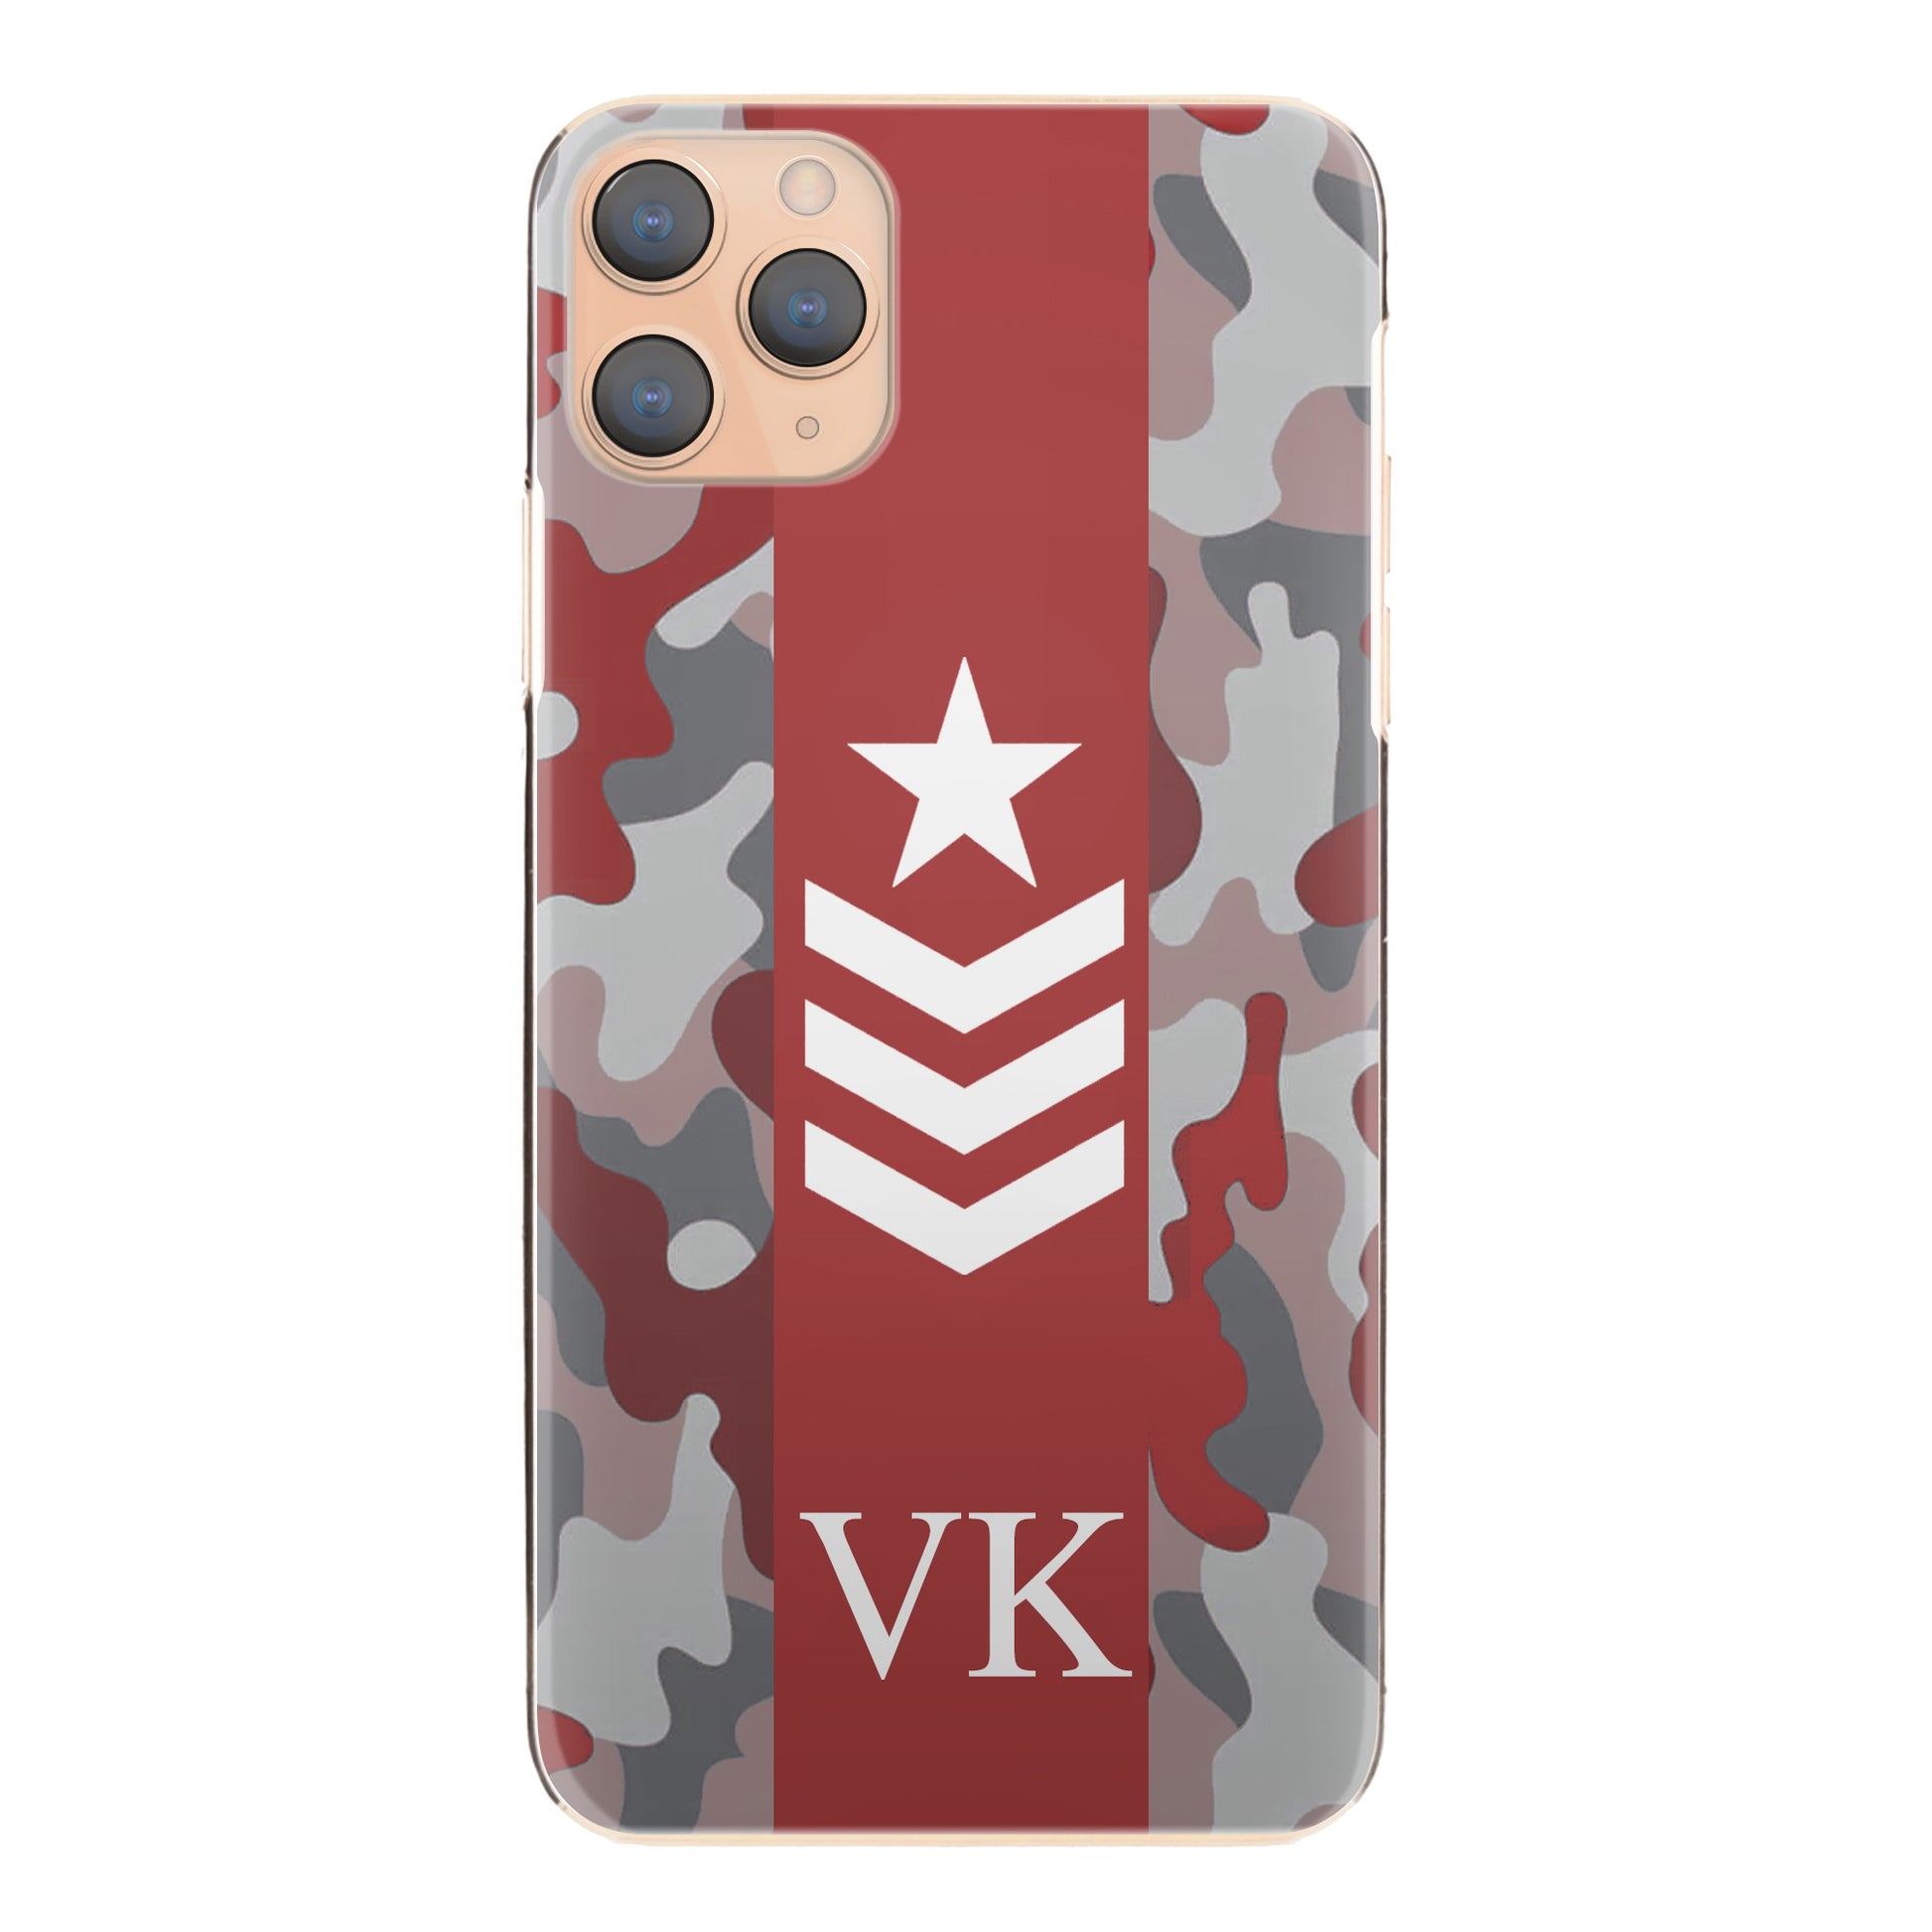 Personalised Motorola Phone Hard Case with Initials and Army Rank on Red Camo